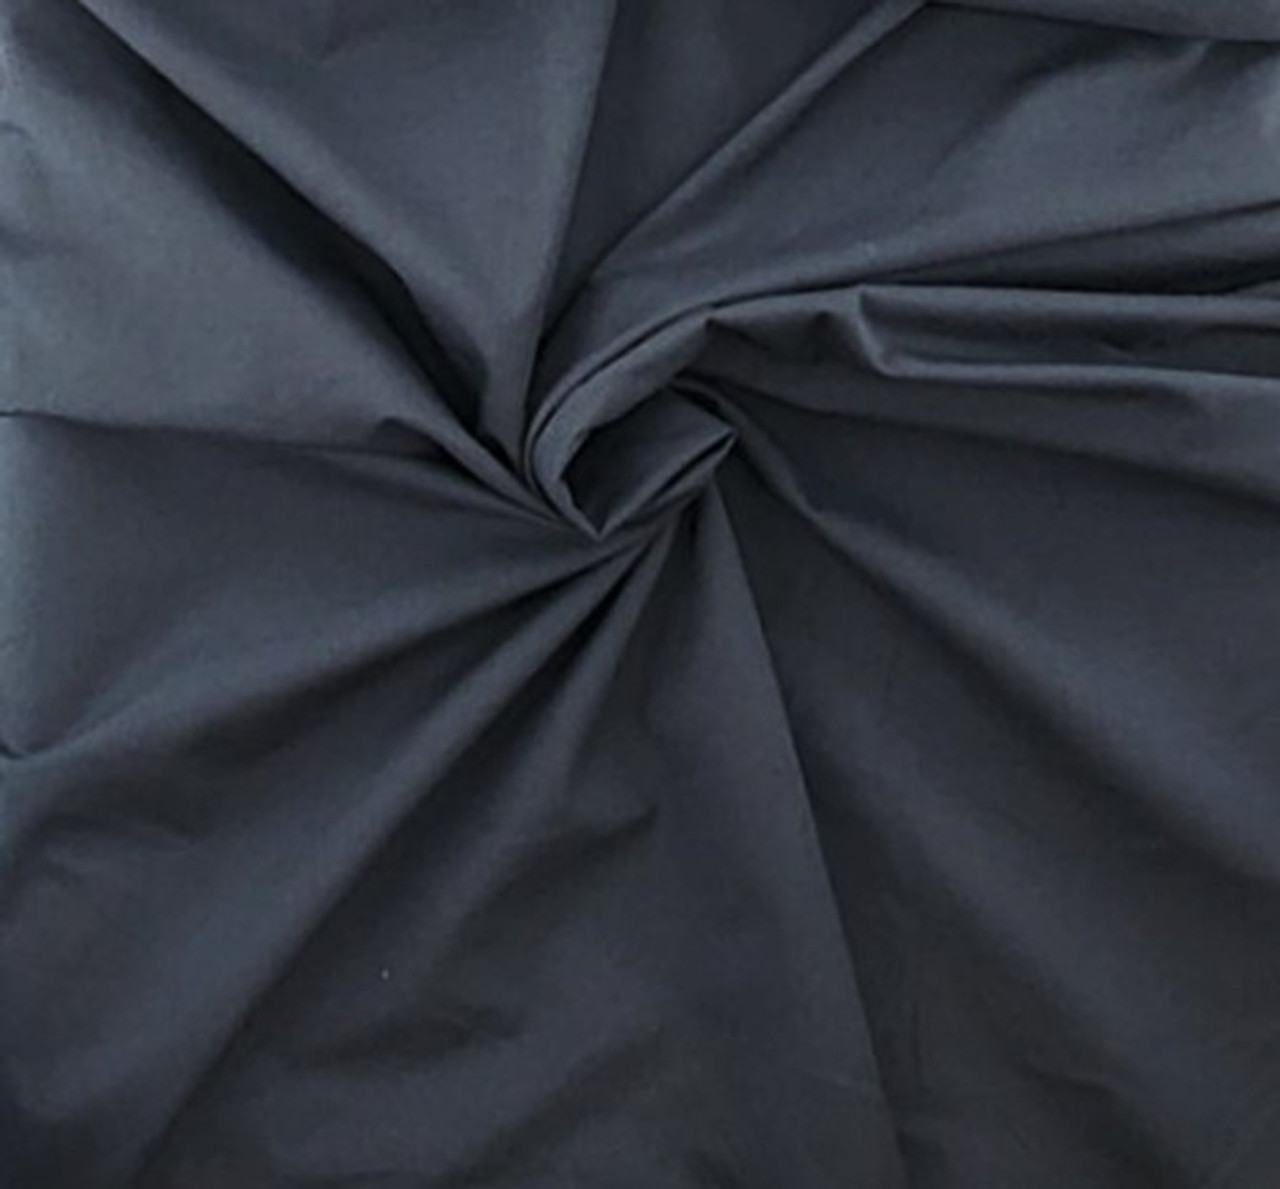 Lining Fabric (Poly/Cotton) - Black Twill 60 - By the Yard